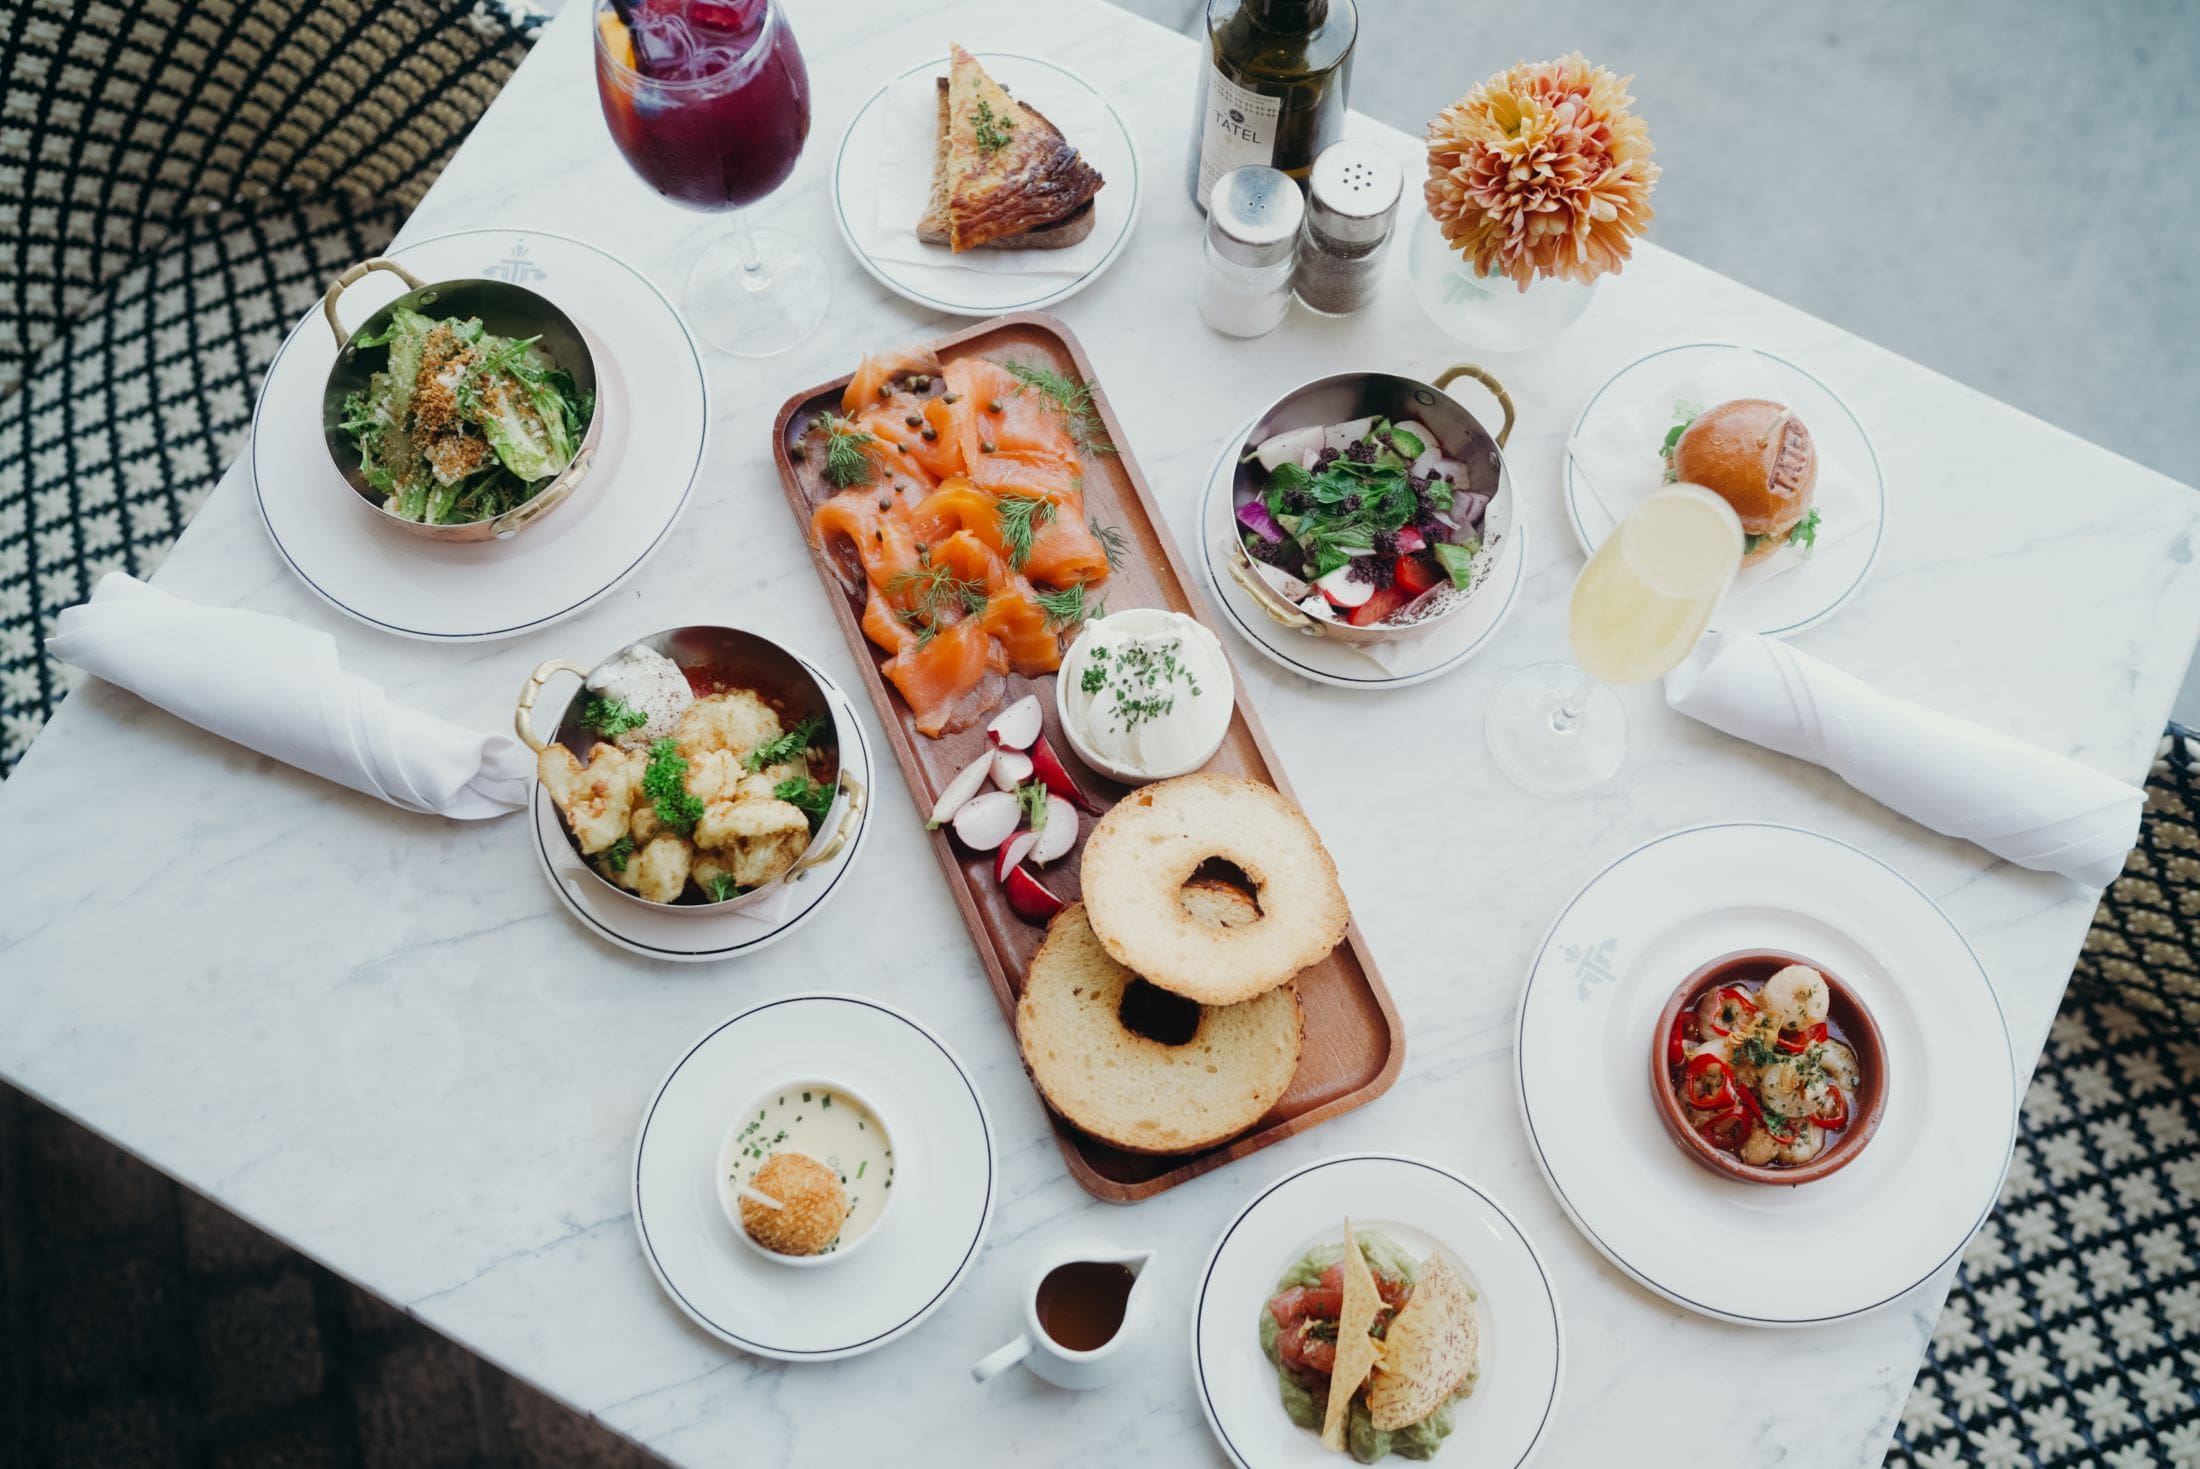 An image of the new brunch spread at Tatel.